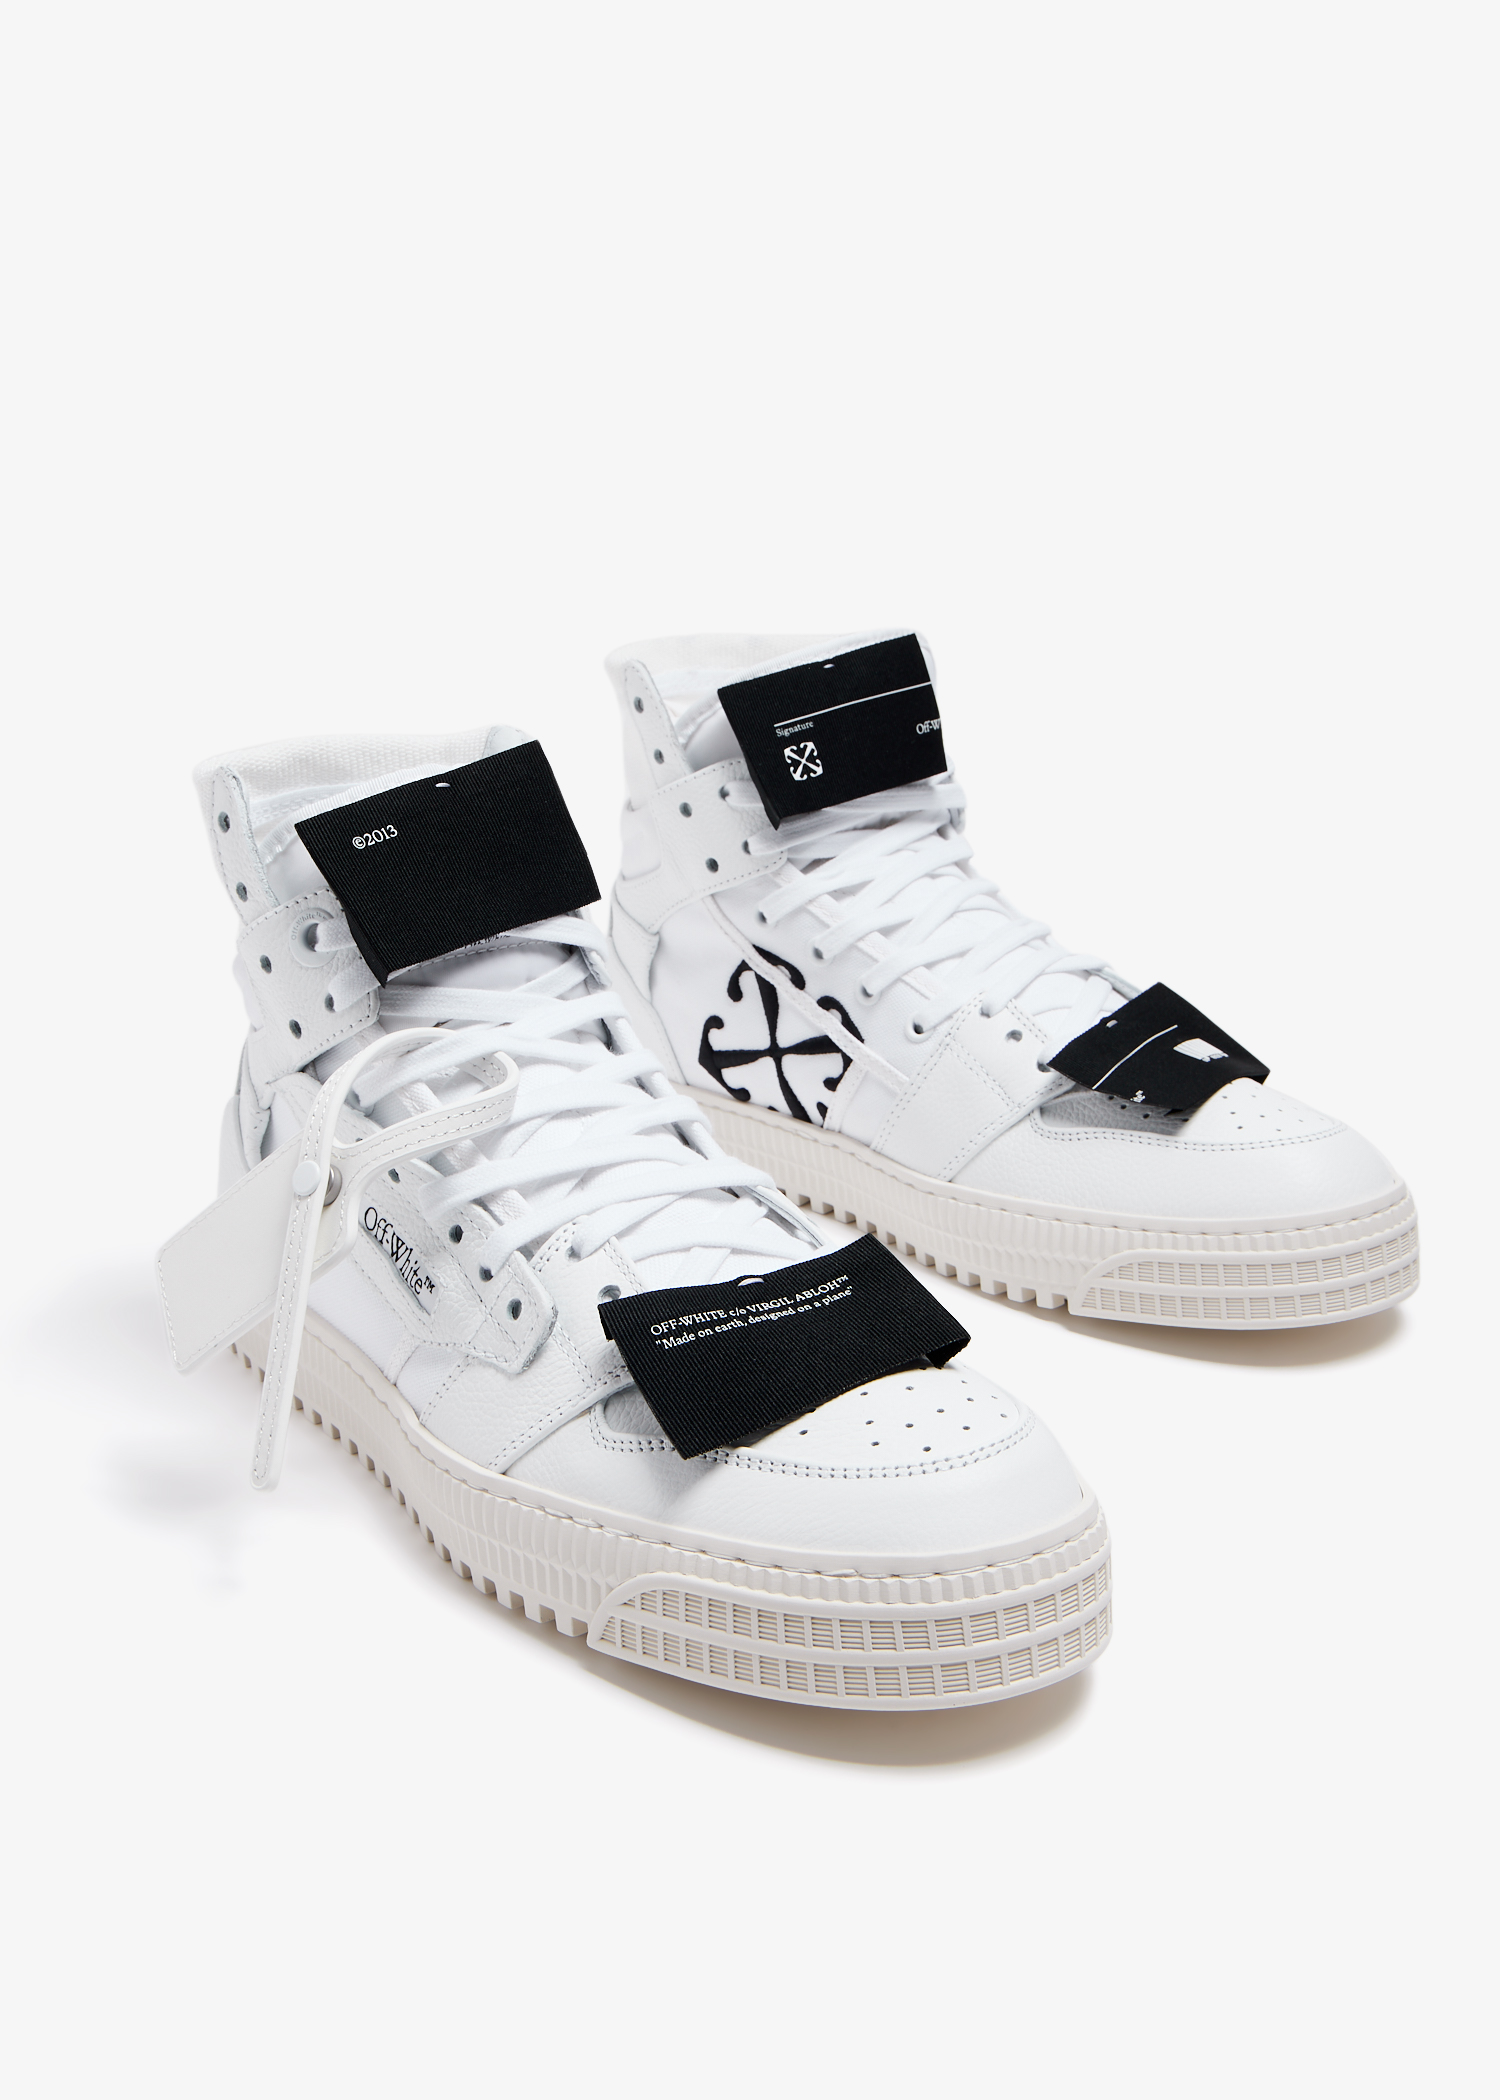 Off-White 3.0 Off-Court sneakers for Men - White in UAE | Level Shoes